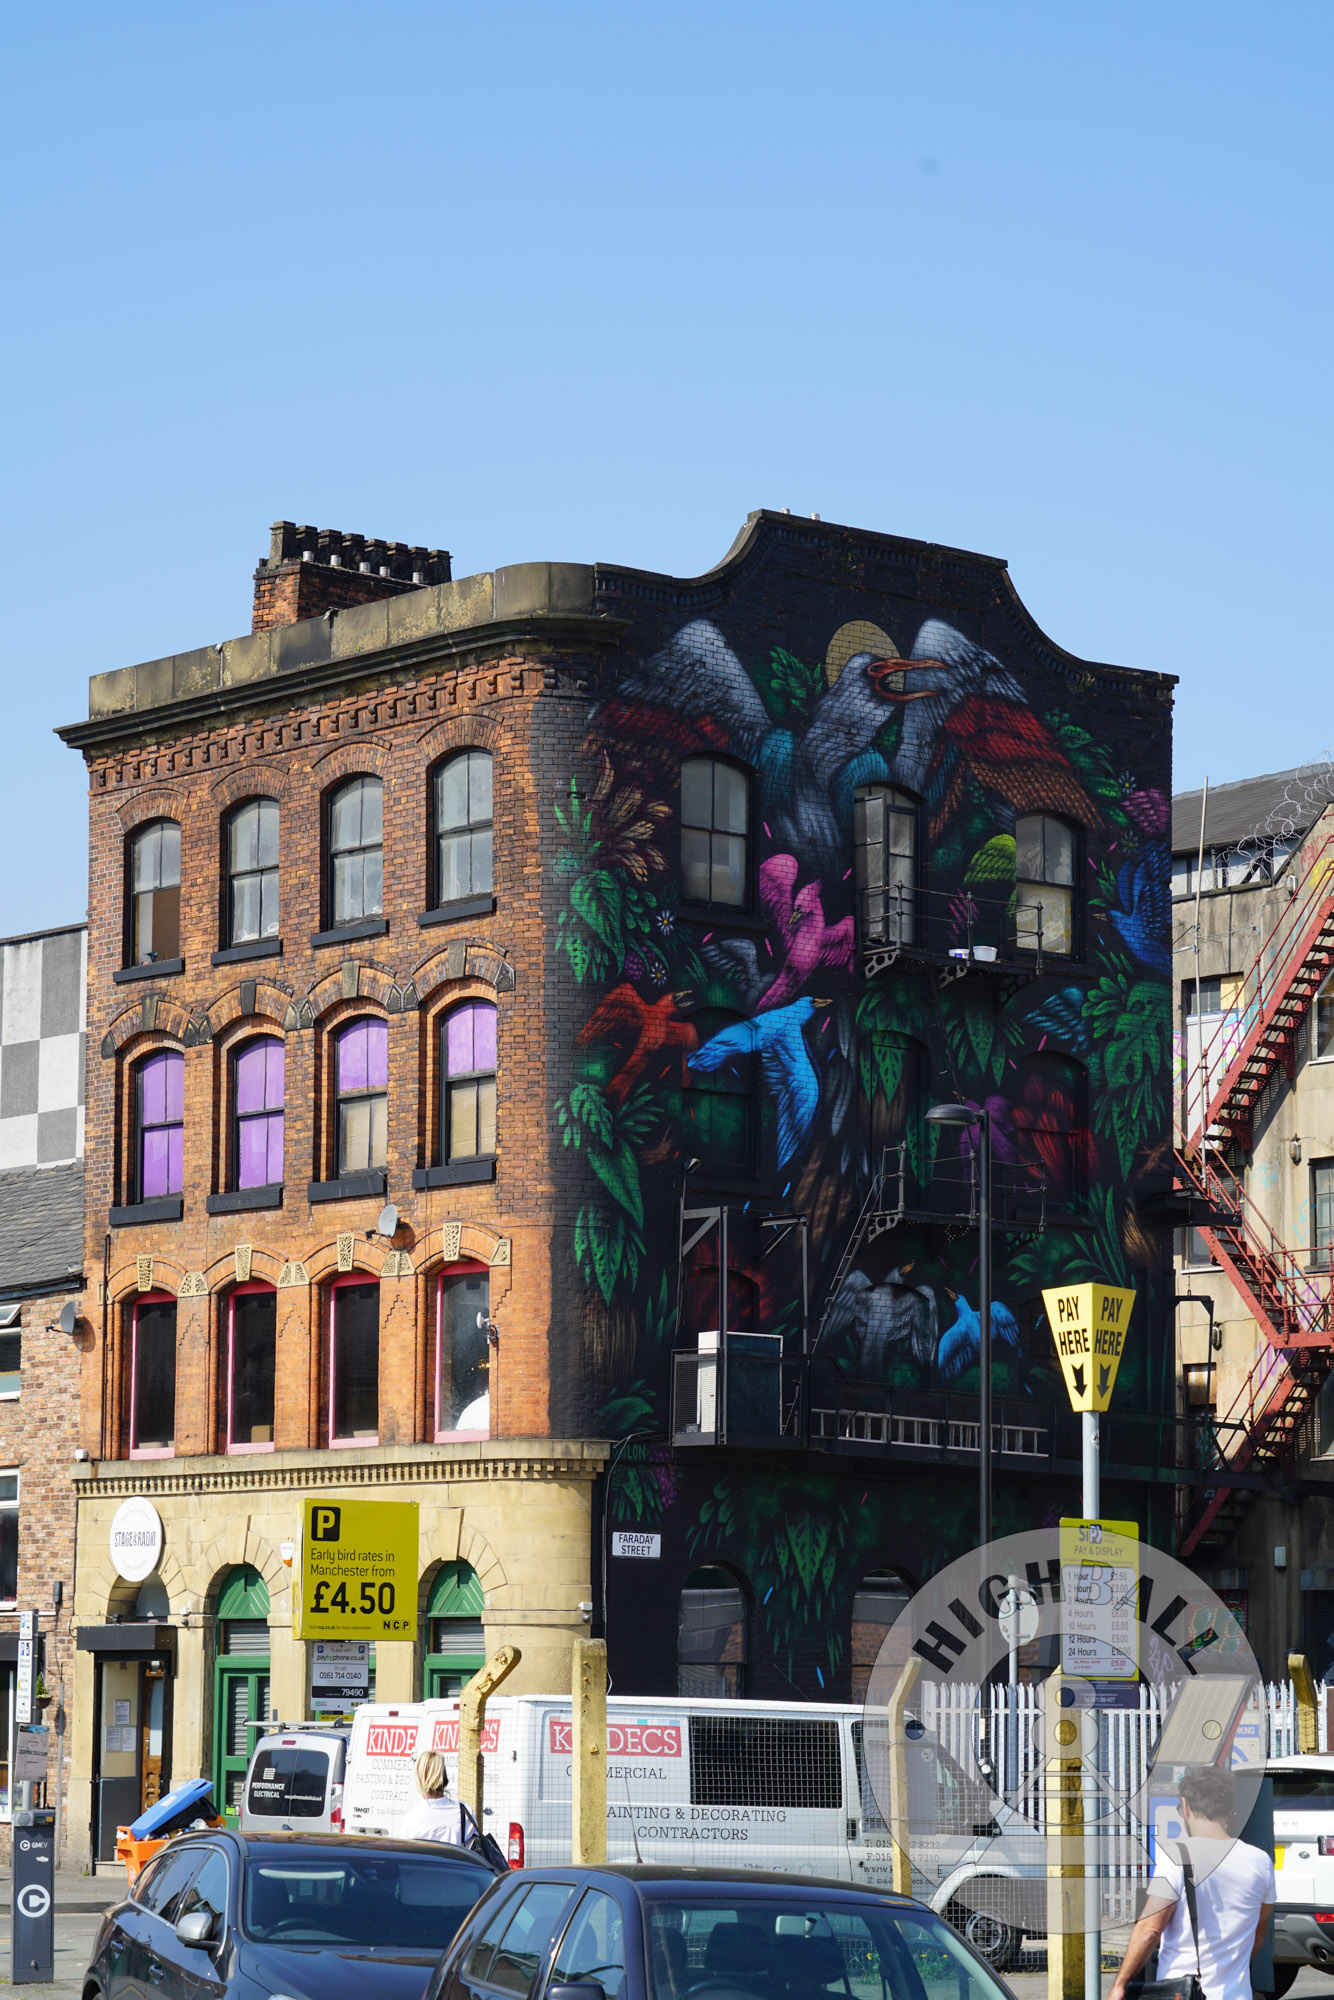 A mural on a building in the Northern Quarter neighborhood, Manchester, England, UK, 2018.